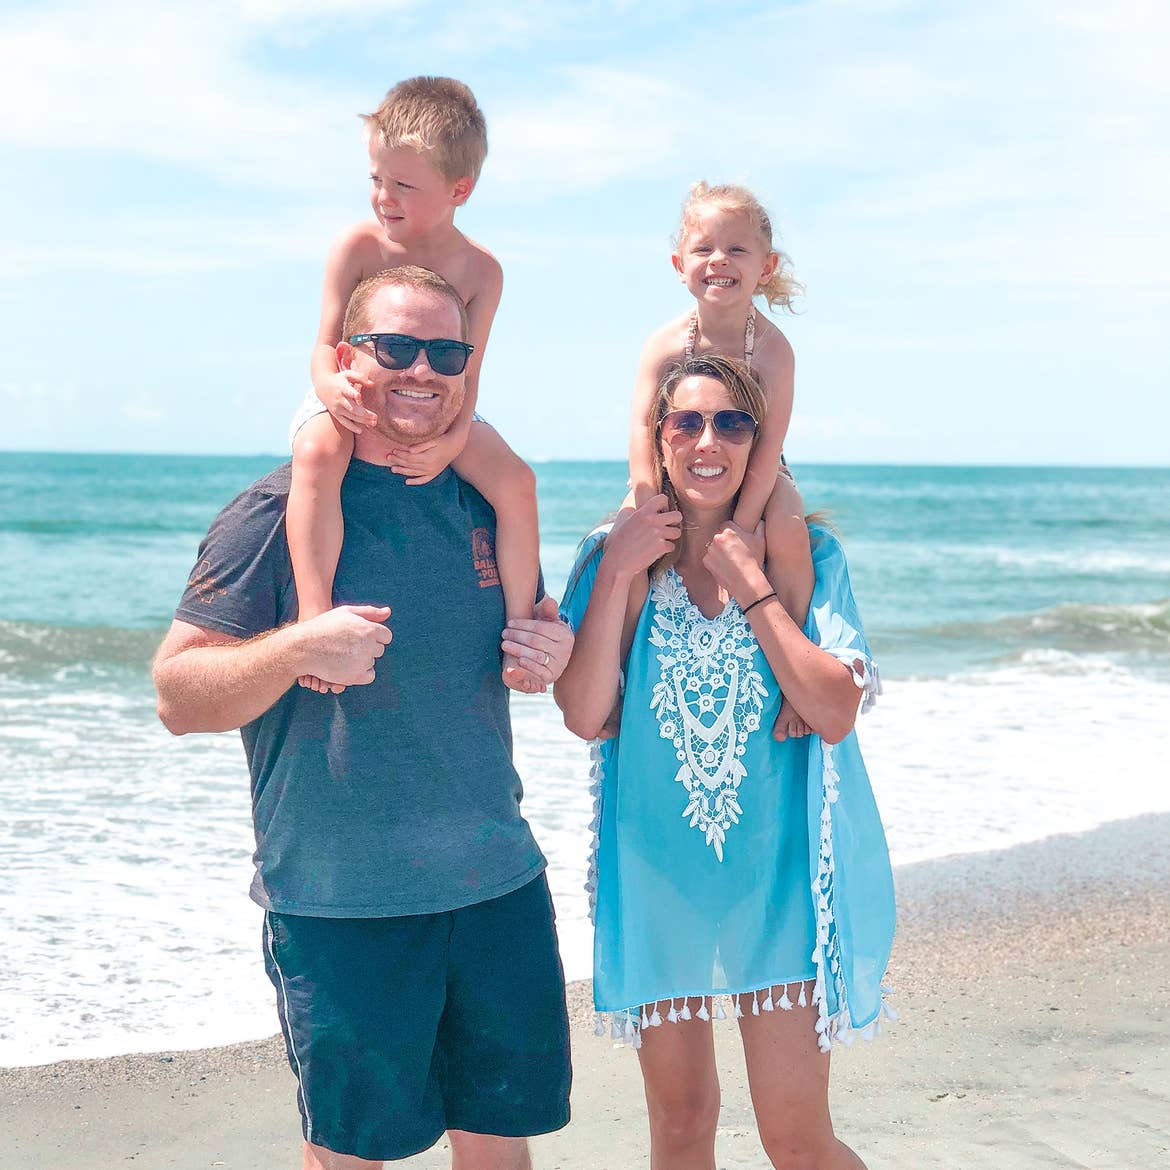 Featured Contributor, Brianna Steele (bottom right) stands with her family on the white sands and shoreline of a beach.